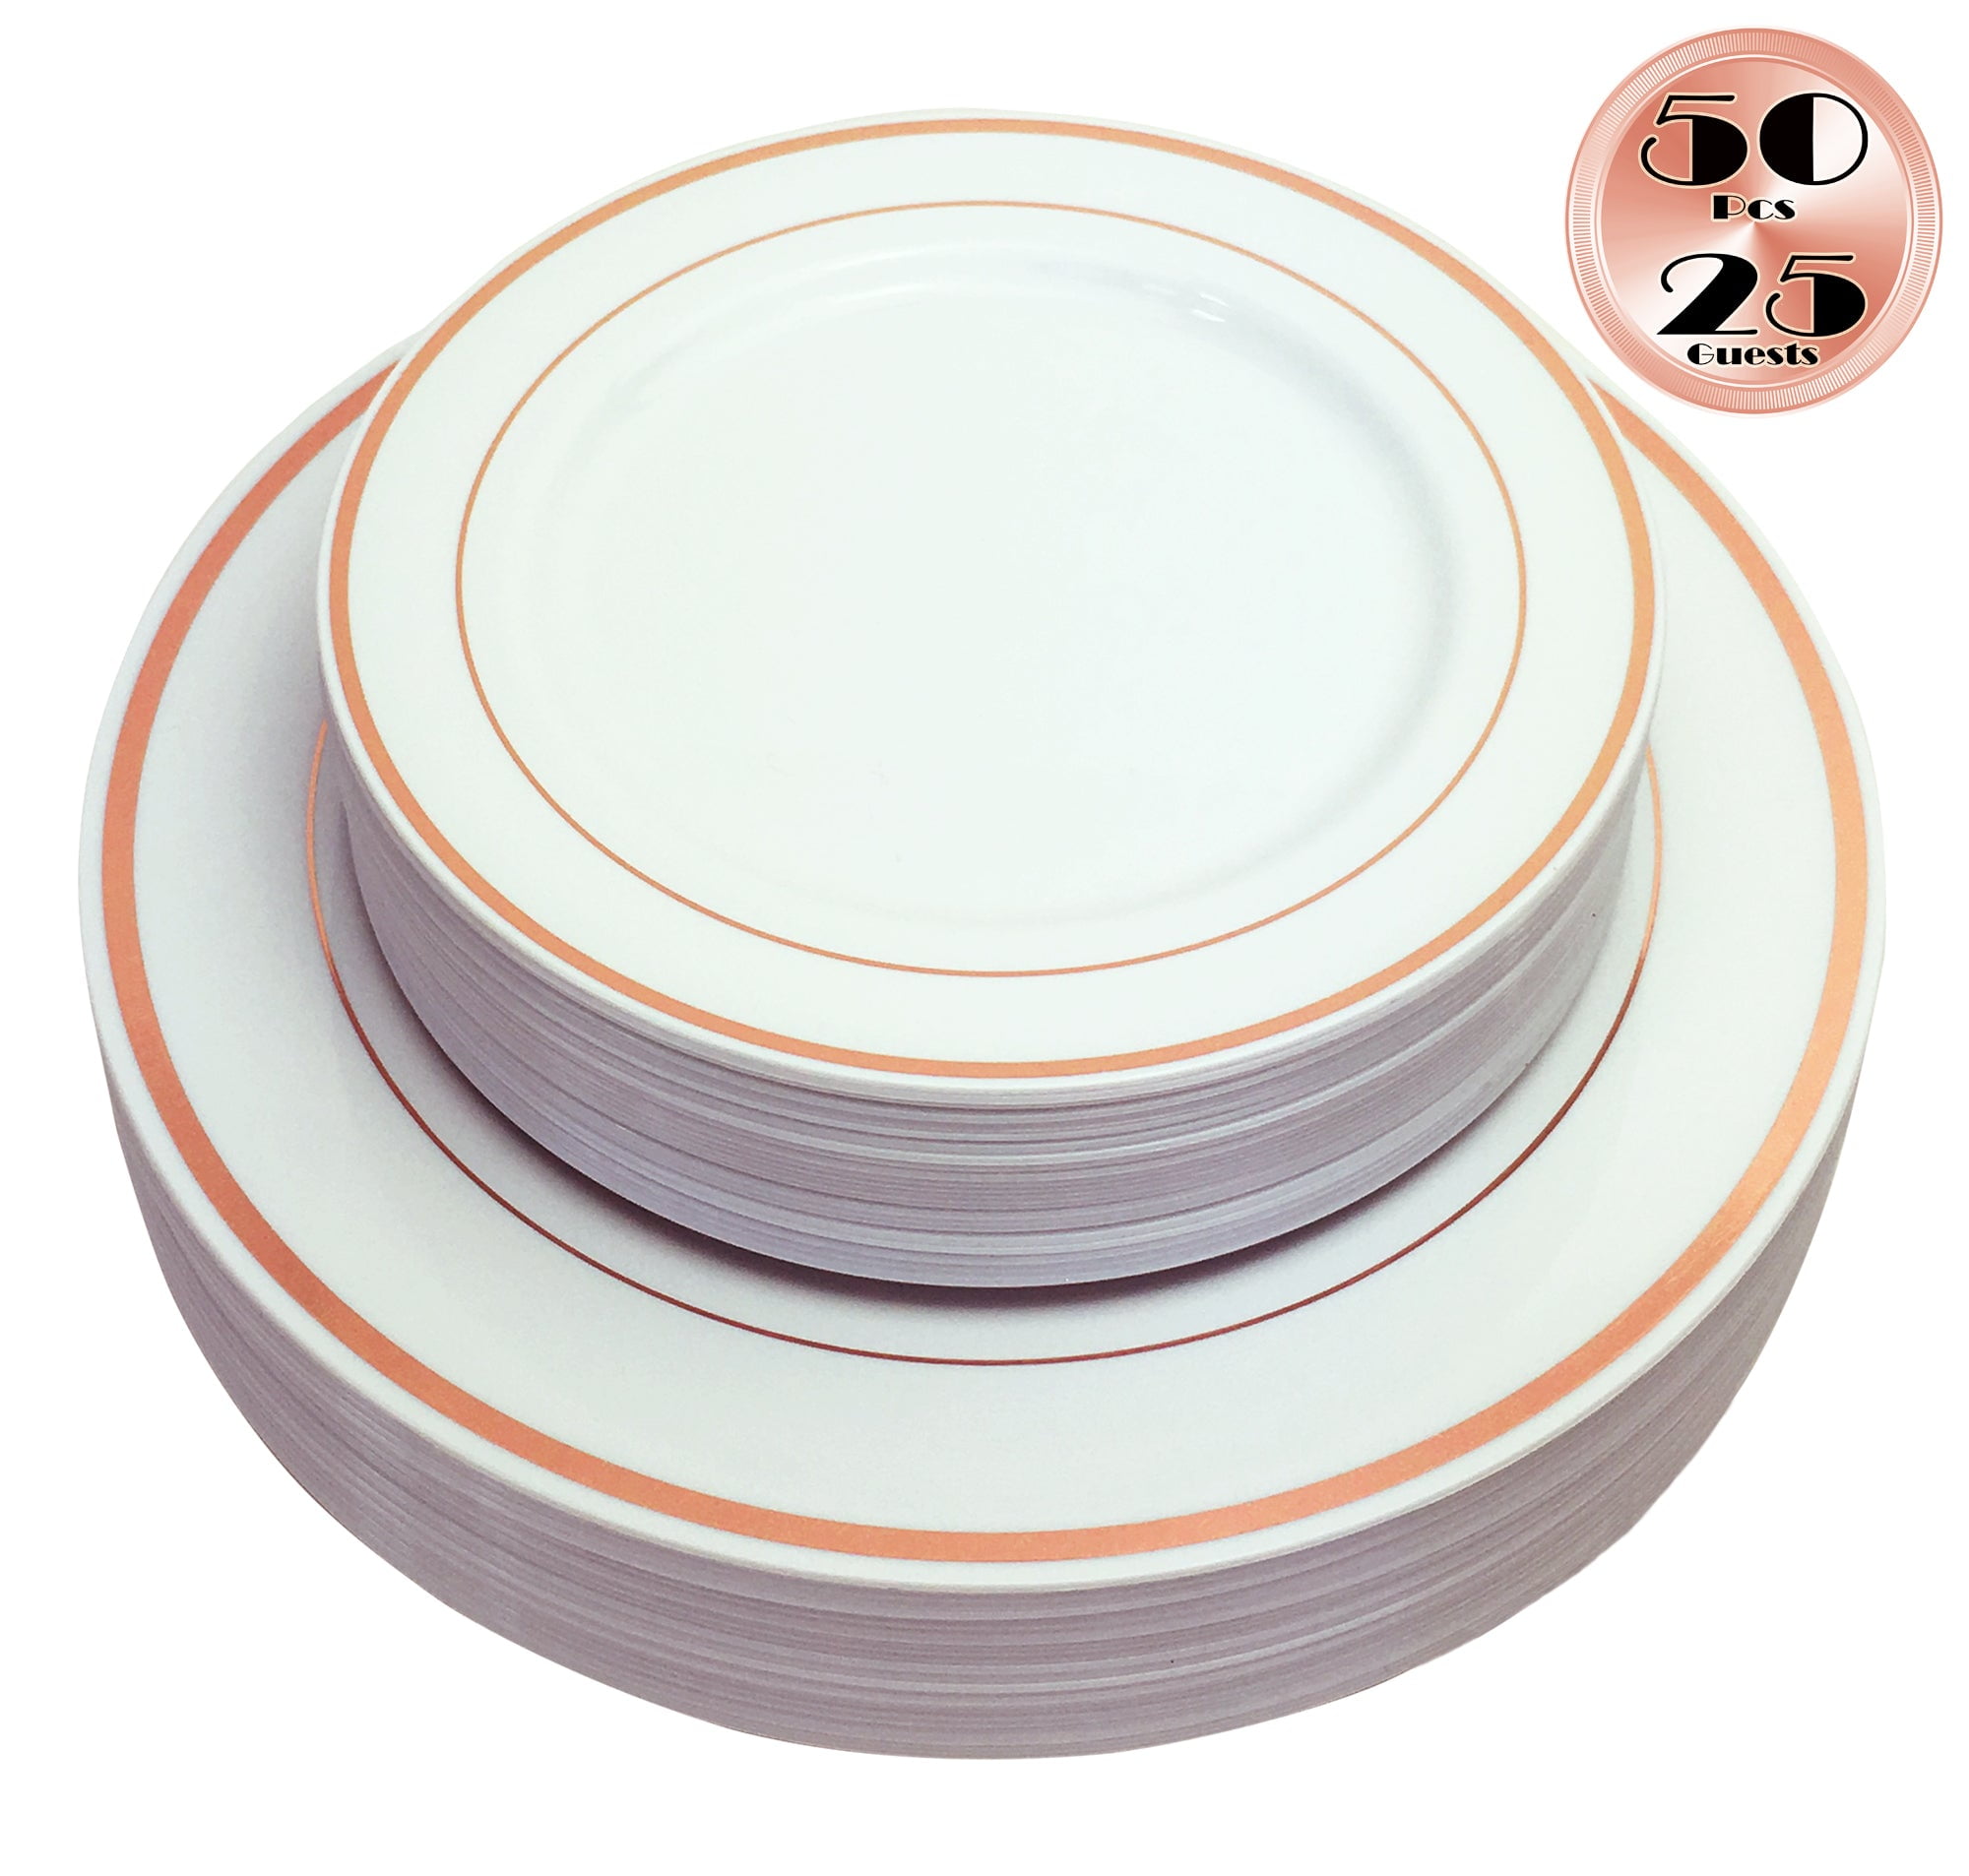 Premium Plastic Square Dinnerware Include: 25 Dinner Plates 25 Knives 25 Forks IOOOOO 150 Pieces Rose Gold Plates & Disposable Silverware & Cups 25 Dessert Plates 25 Spoons 25 Tumblers 10 OZ 